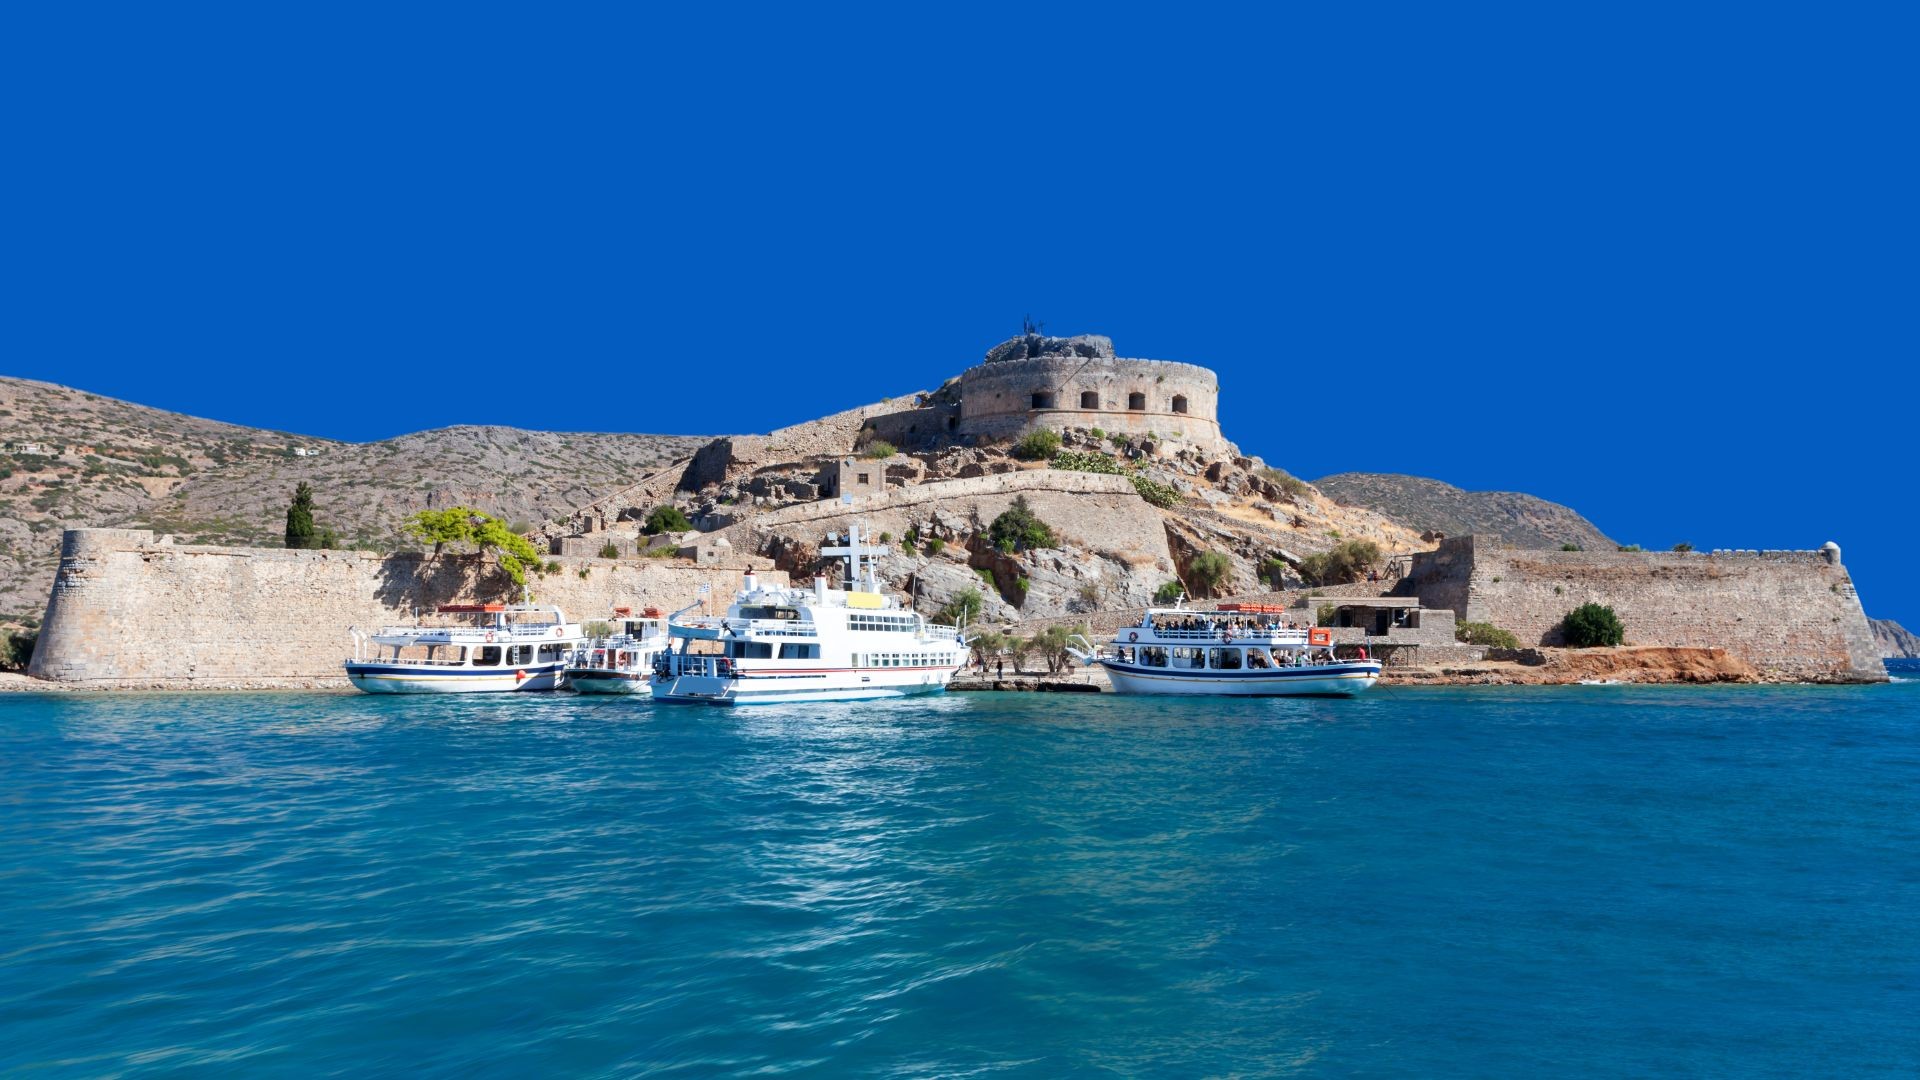 Spinalonga Island: From Venetian Fortress to Leper Colony – A Tale of Isolation and Resilience